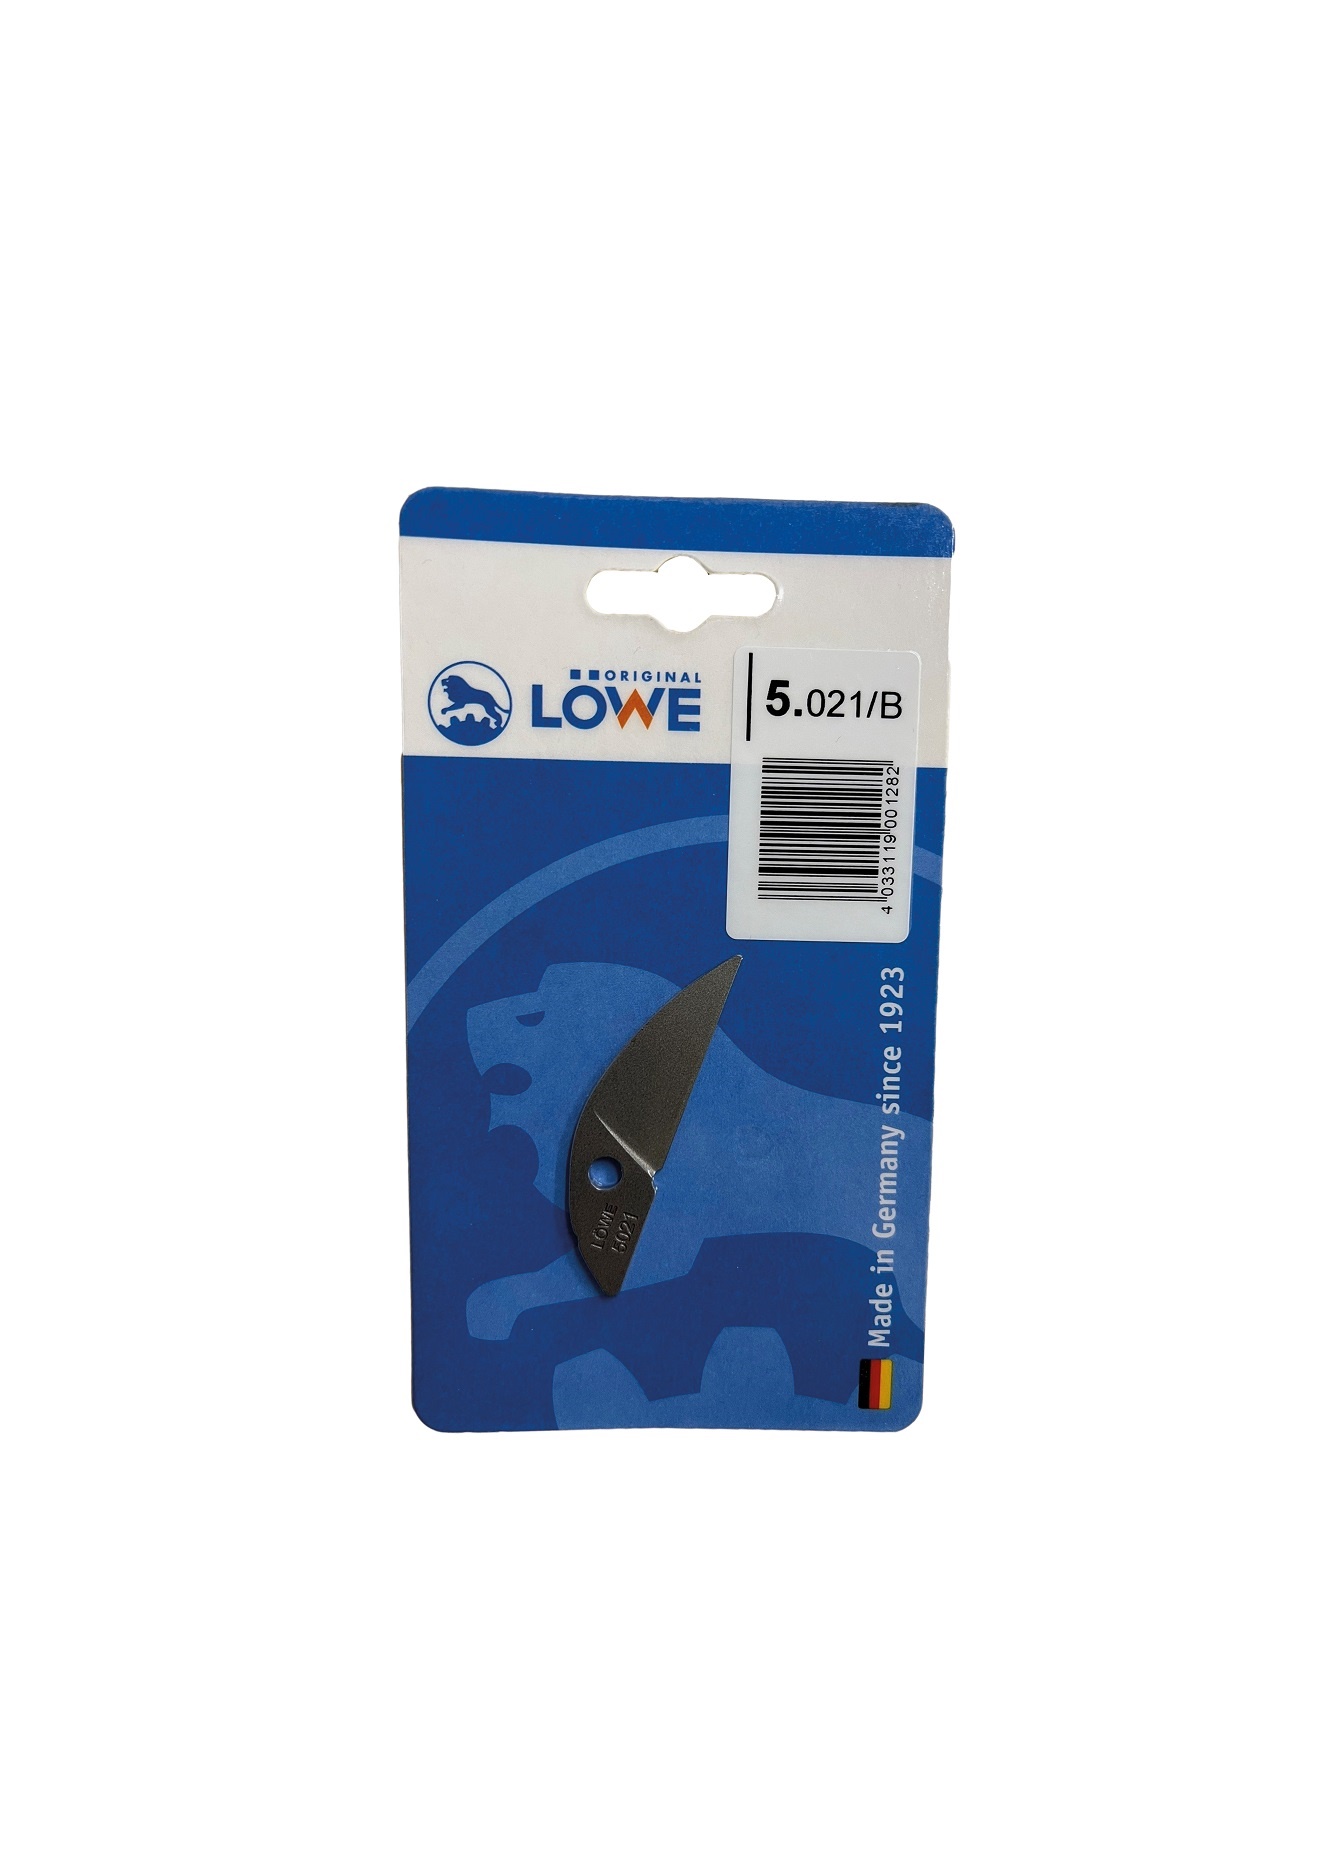 Blade LÖWE 5,1 piece in blister pack